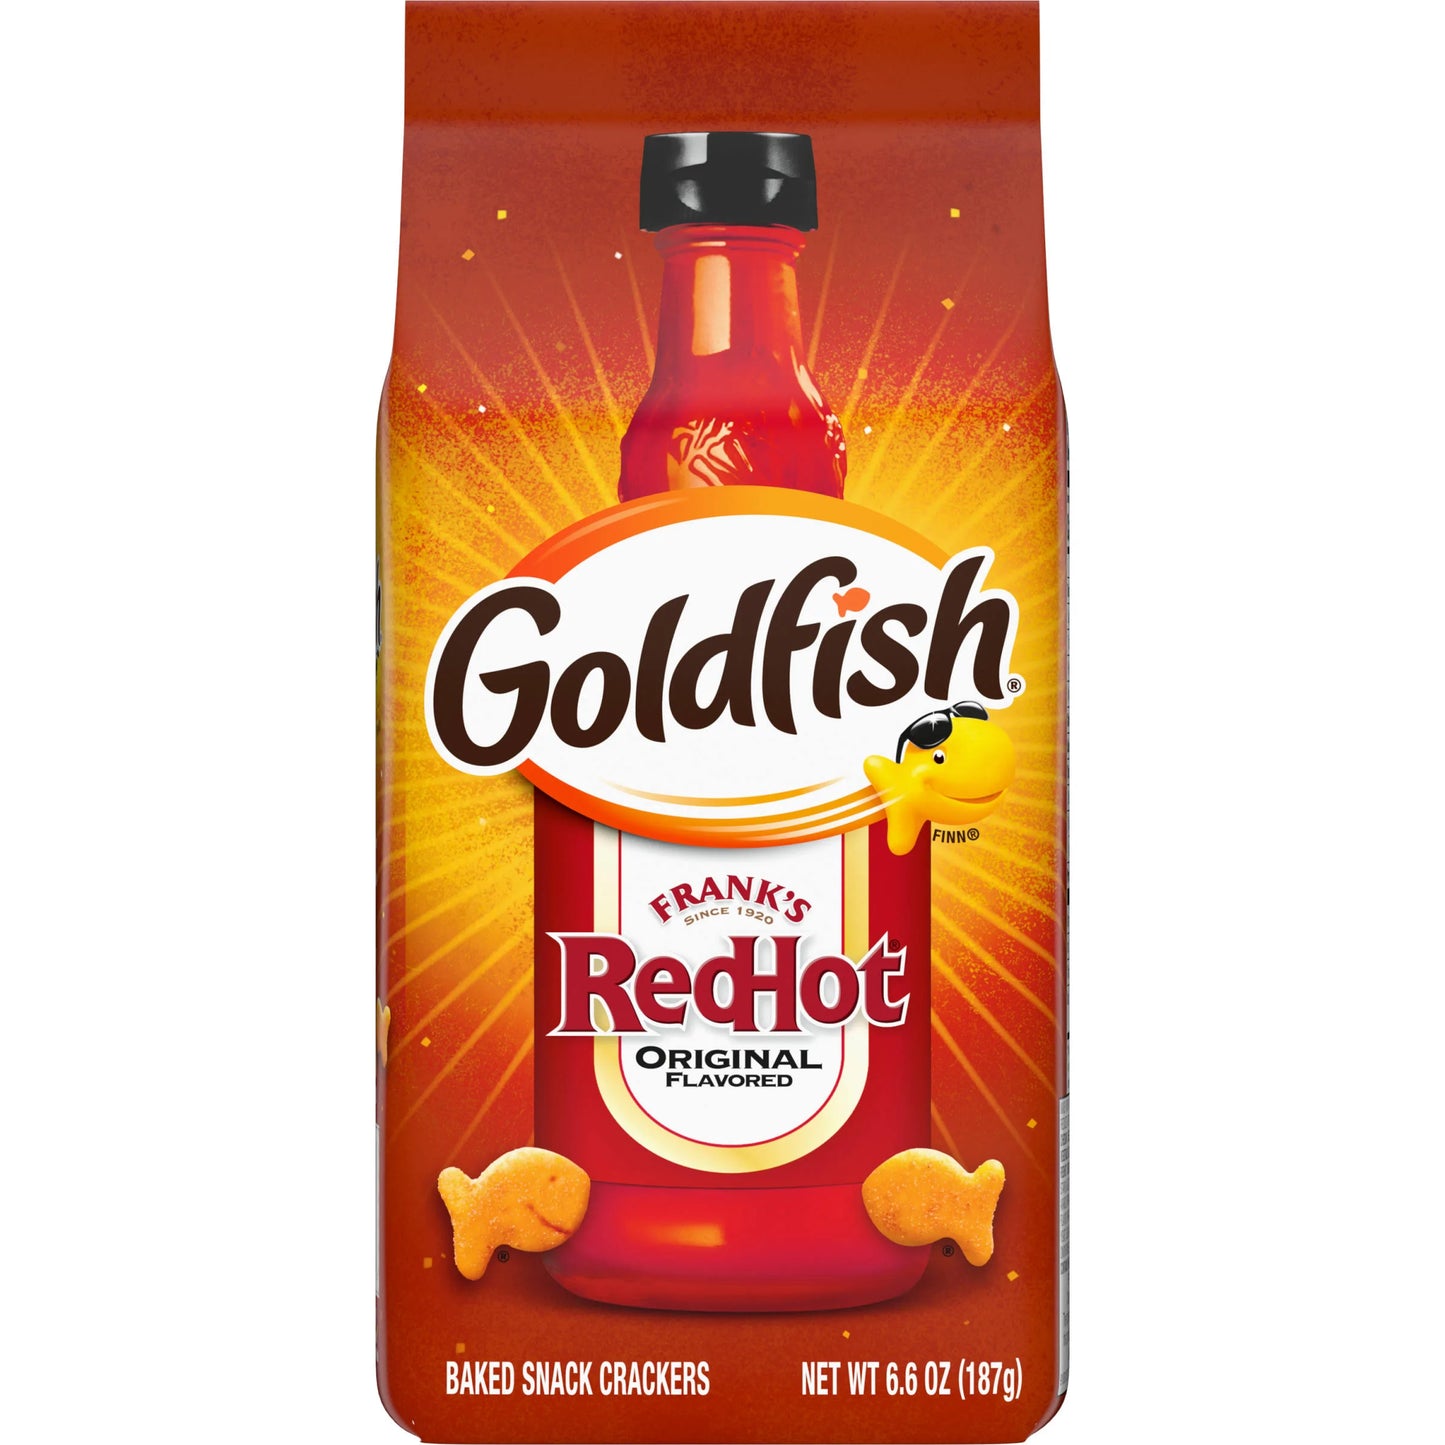 Franks Red Hot Goldfish Limited Edition (187g)